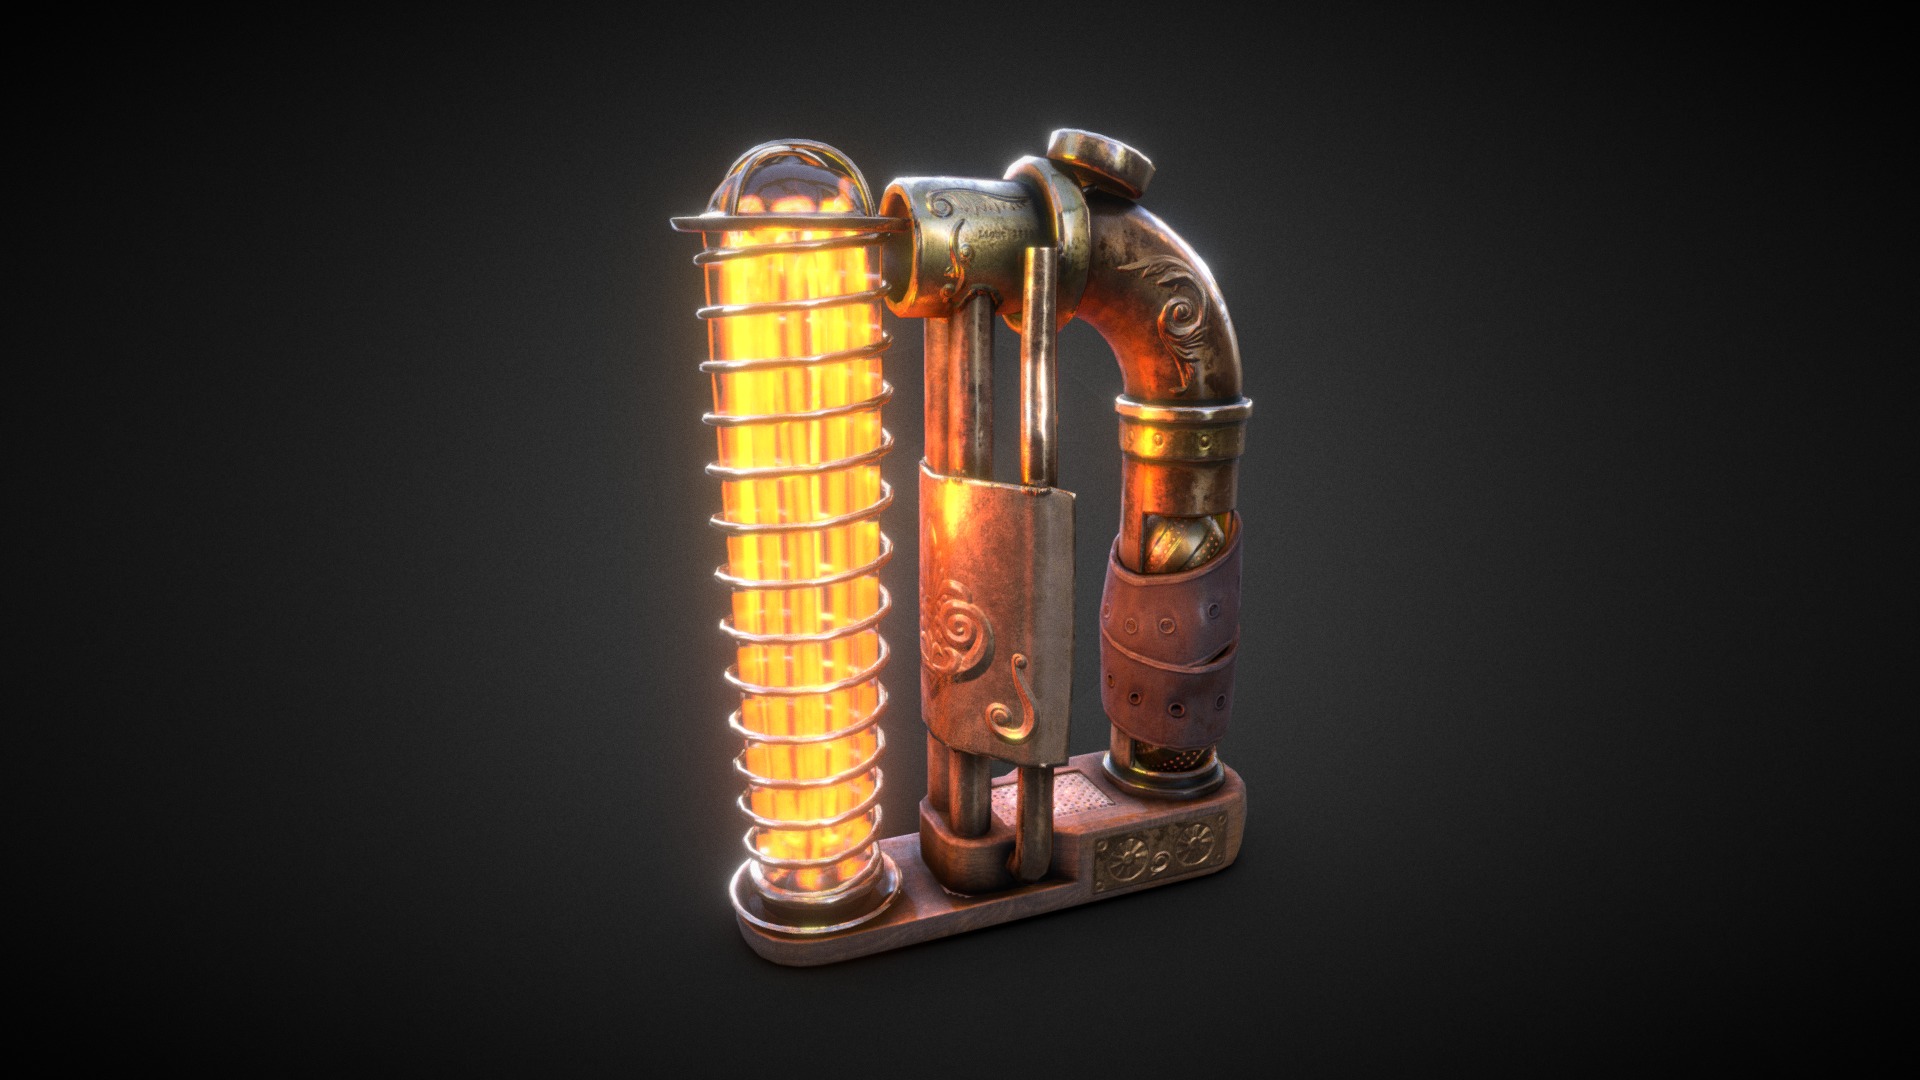 3D model SteamPunk Light - This is a 3D model of the SteamPunk Light. The 3D model is about a gold and silver robot.